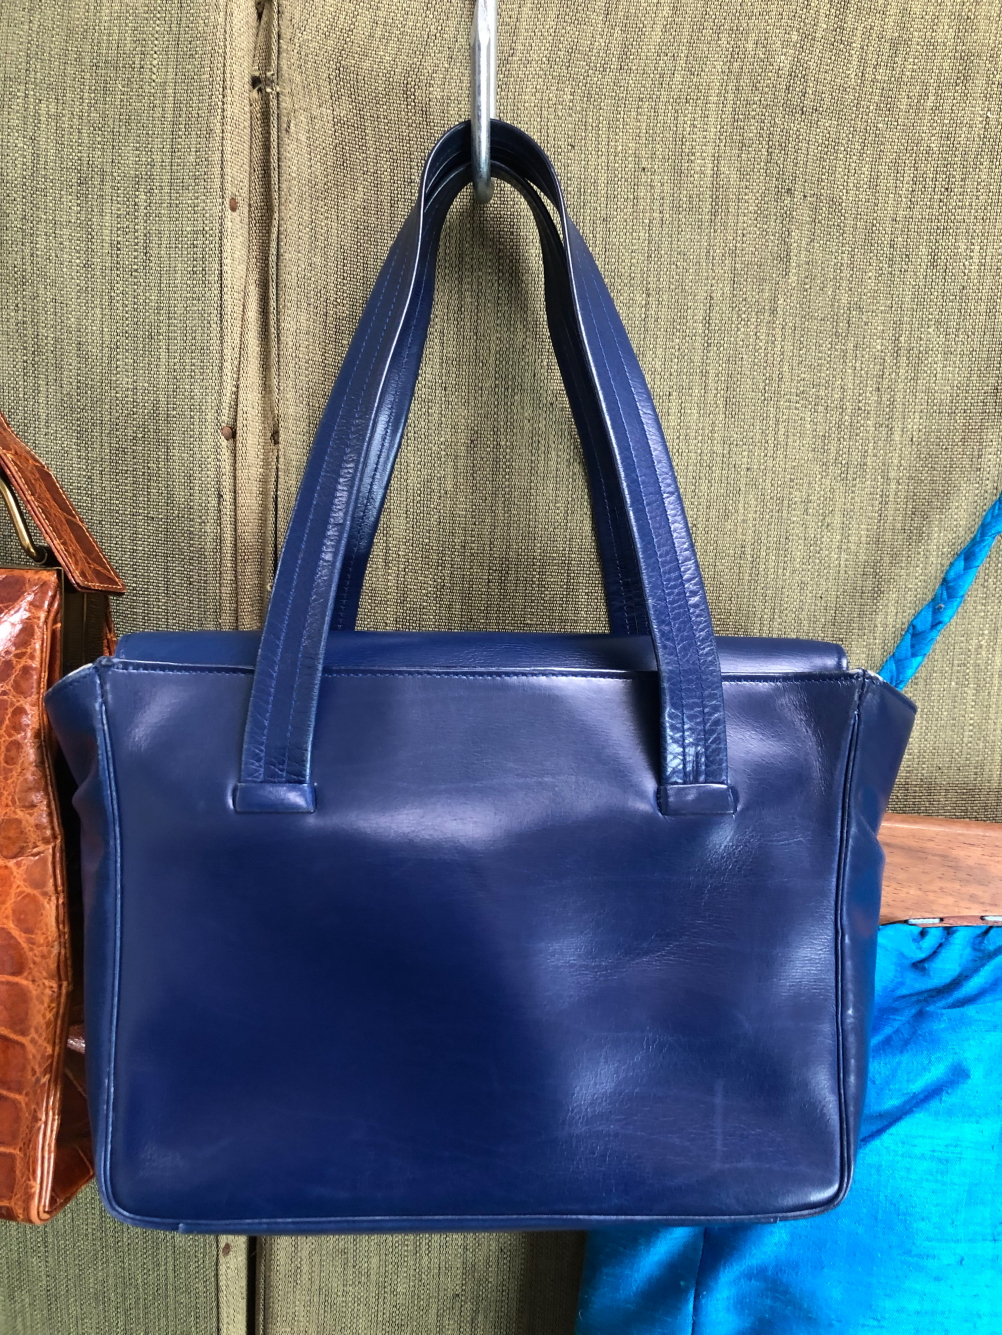 BAGS. A BAG CRAFT OF LONDON BLUE LEATHER BAG, TOGETHER WITH A CROCODILE EFFECT BROWN HANDBAG AND TWO - Image 4 of 5